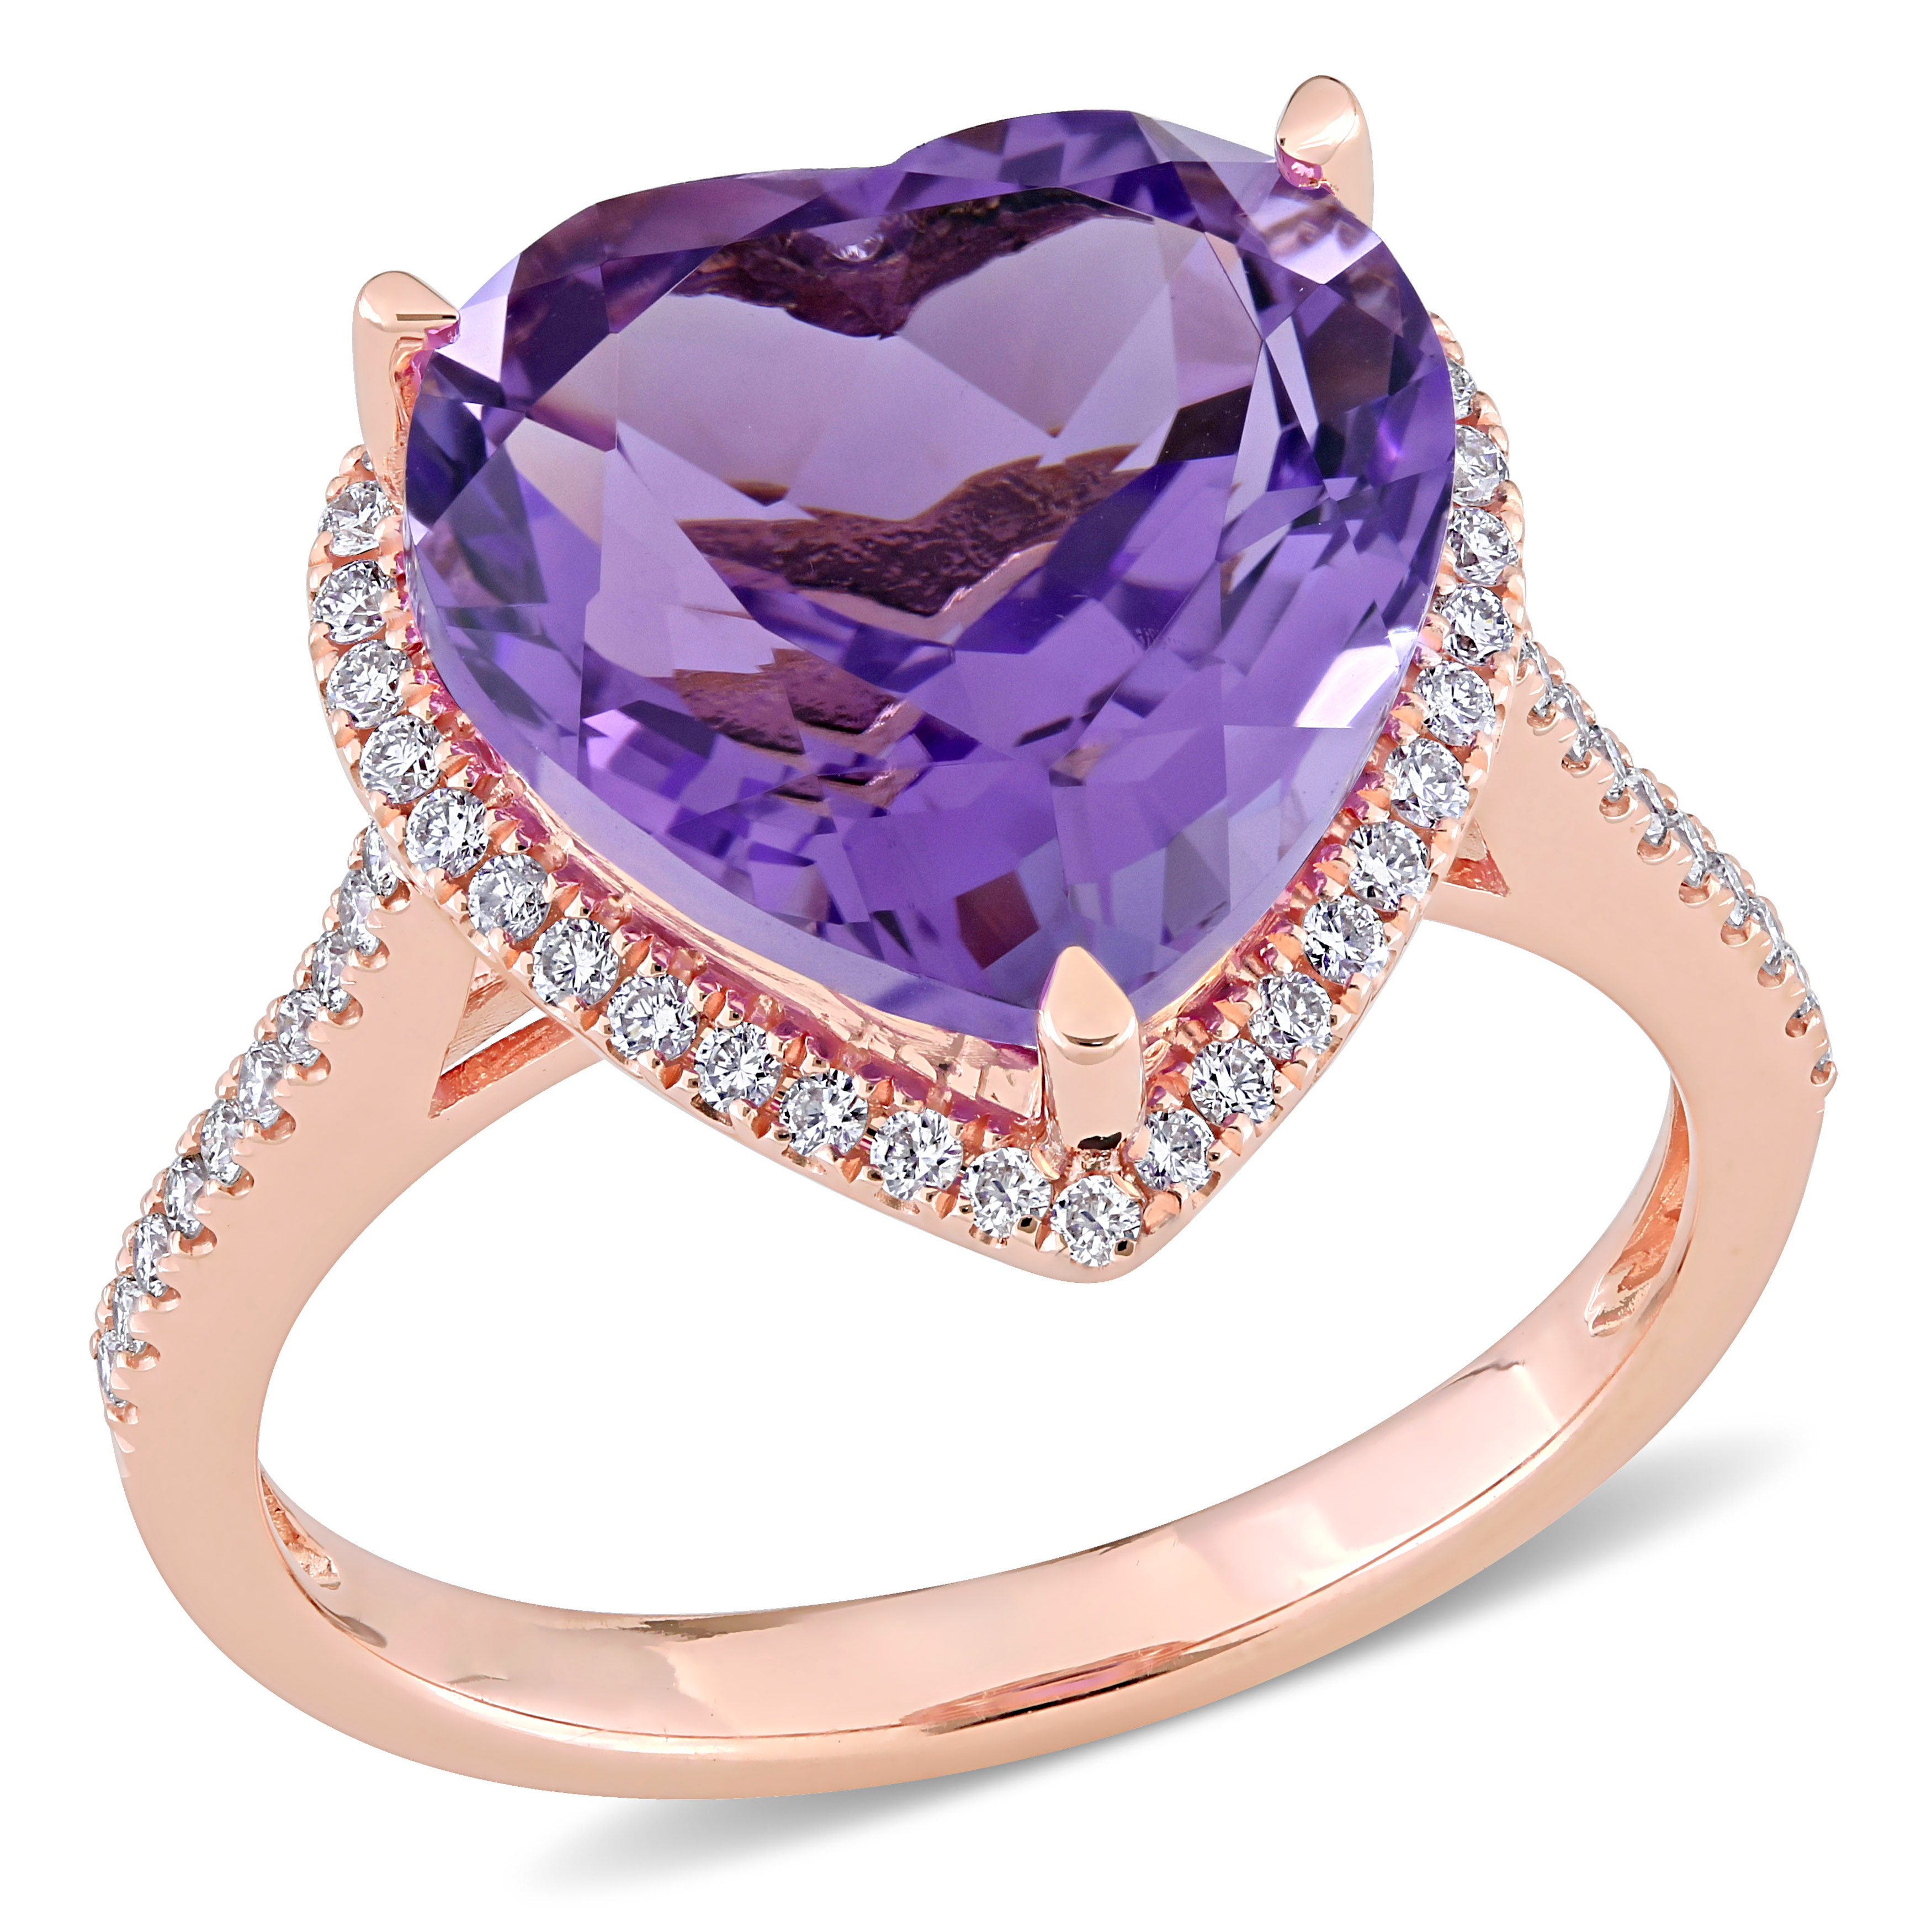 6 1/2 CT TGW Heart Shape Amethyst and 1/3 CT TW Diamond Halo Ring in 14k Rose Gold